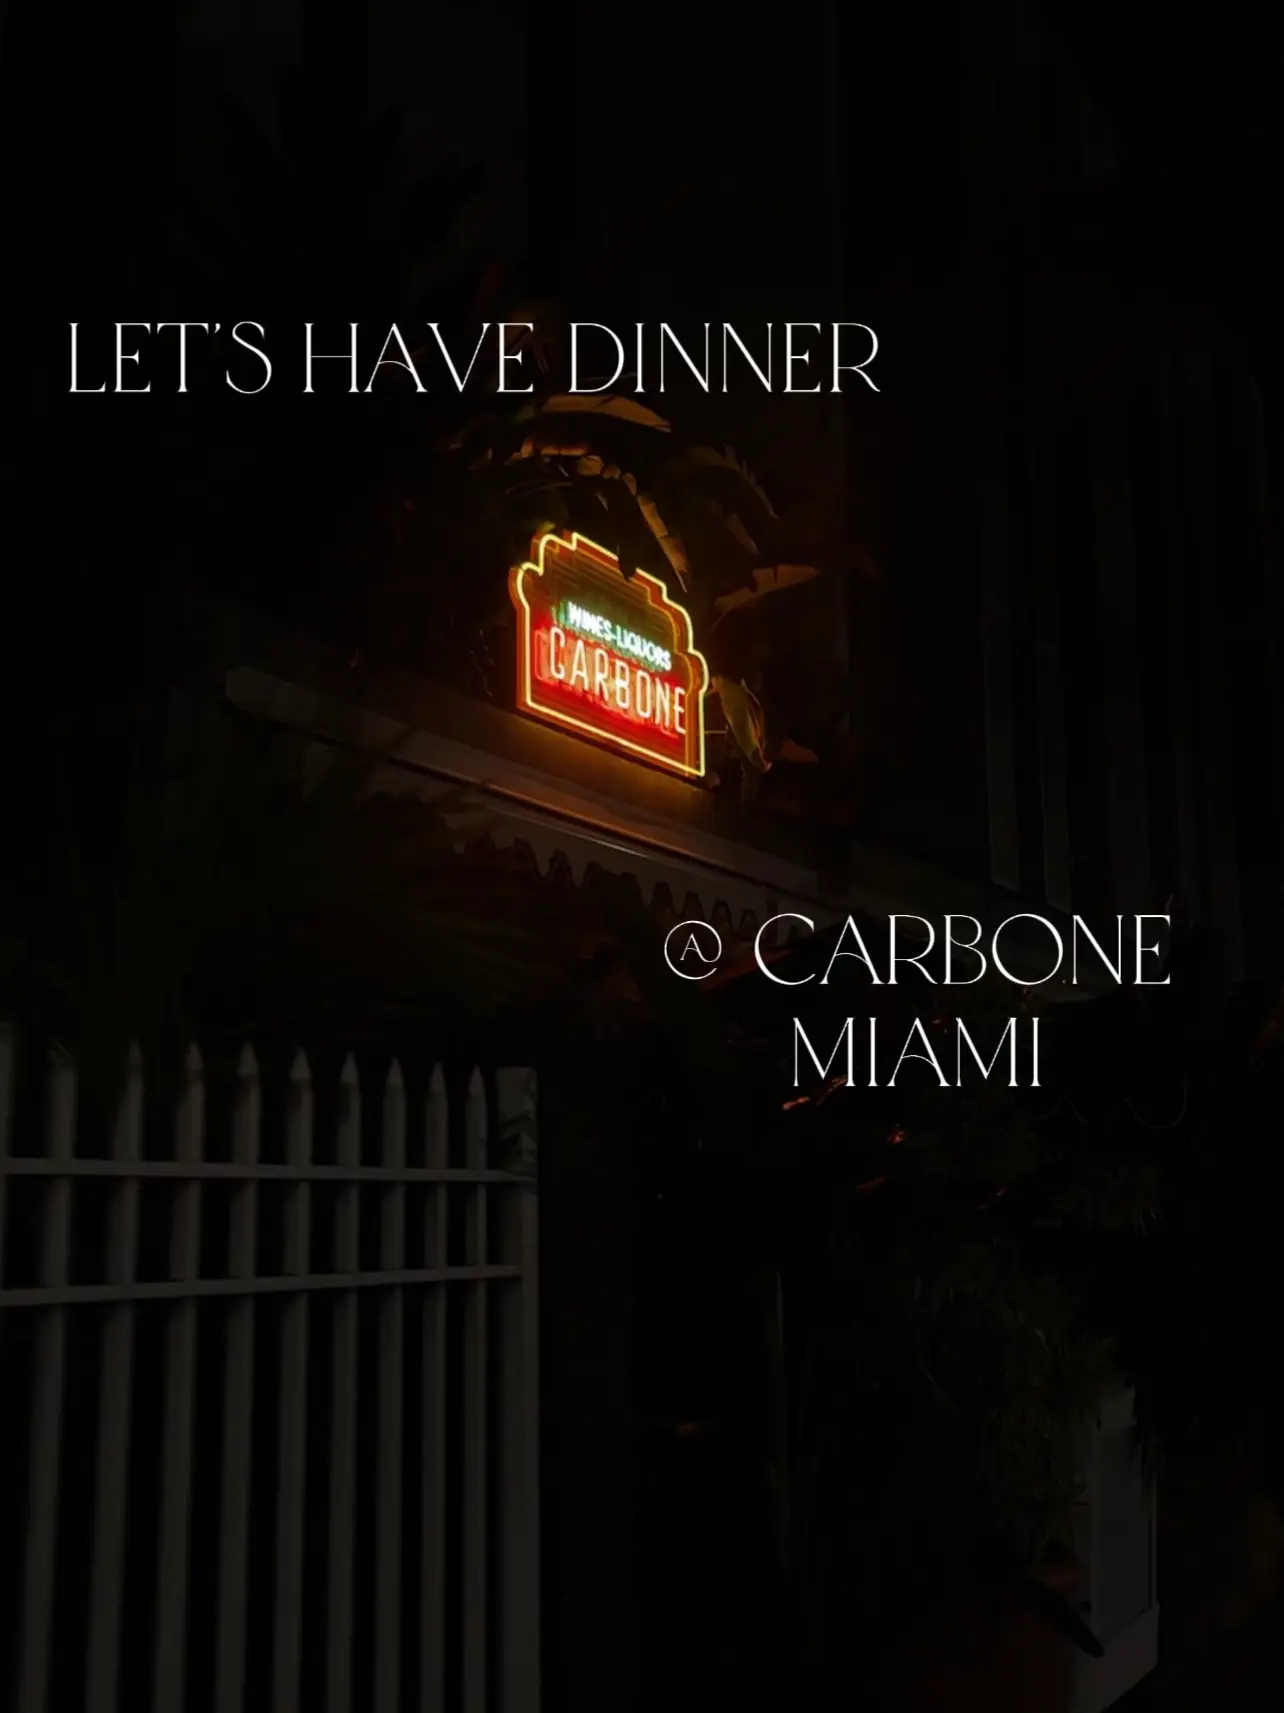 Where To Go When You Can't Get Into Carbone - Miami - The Infatuation